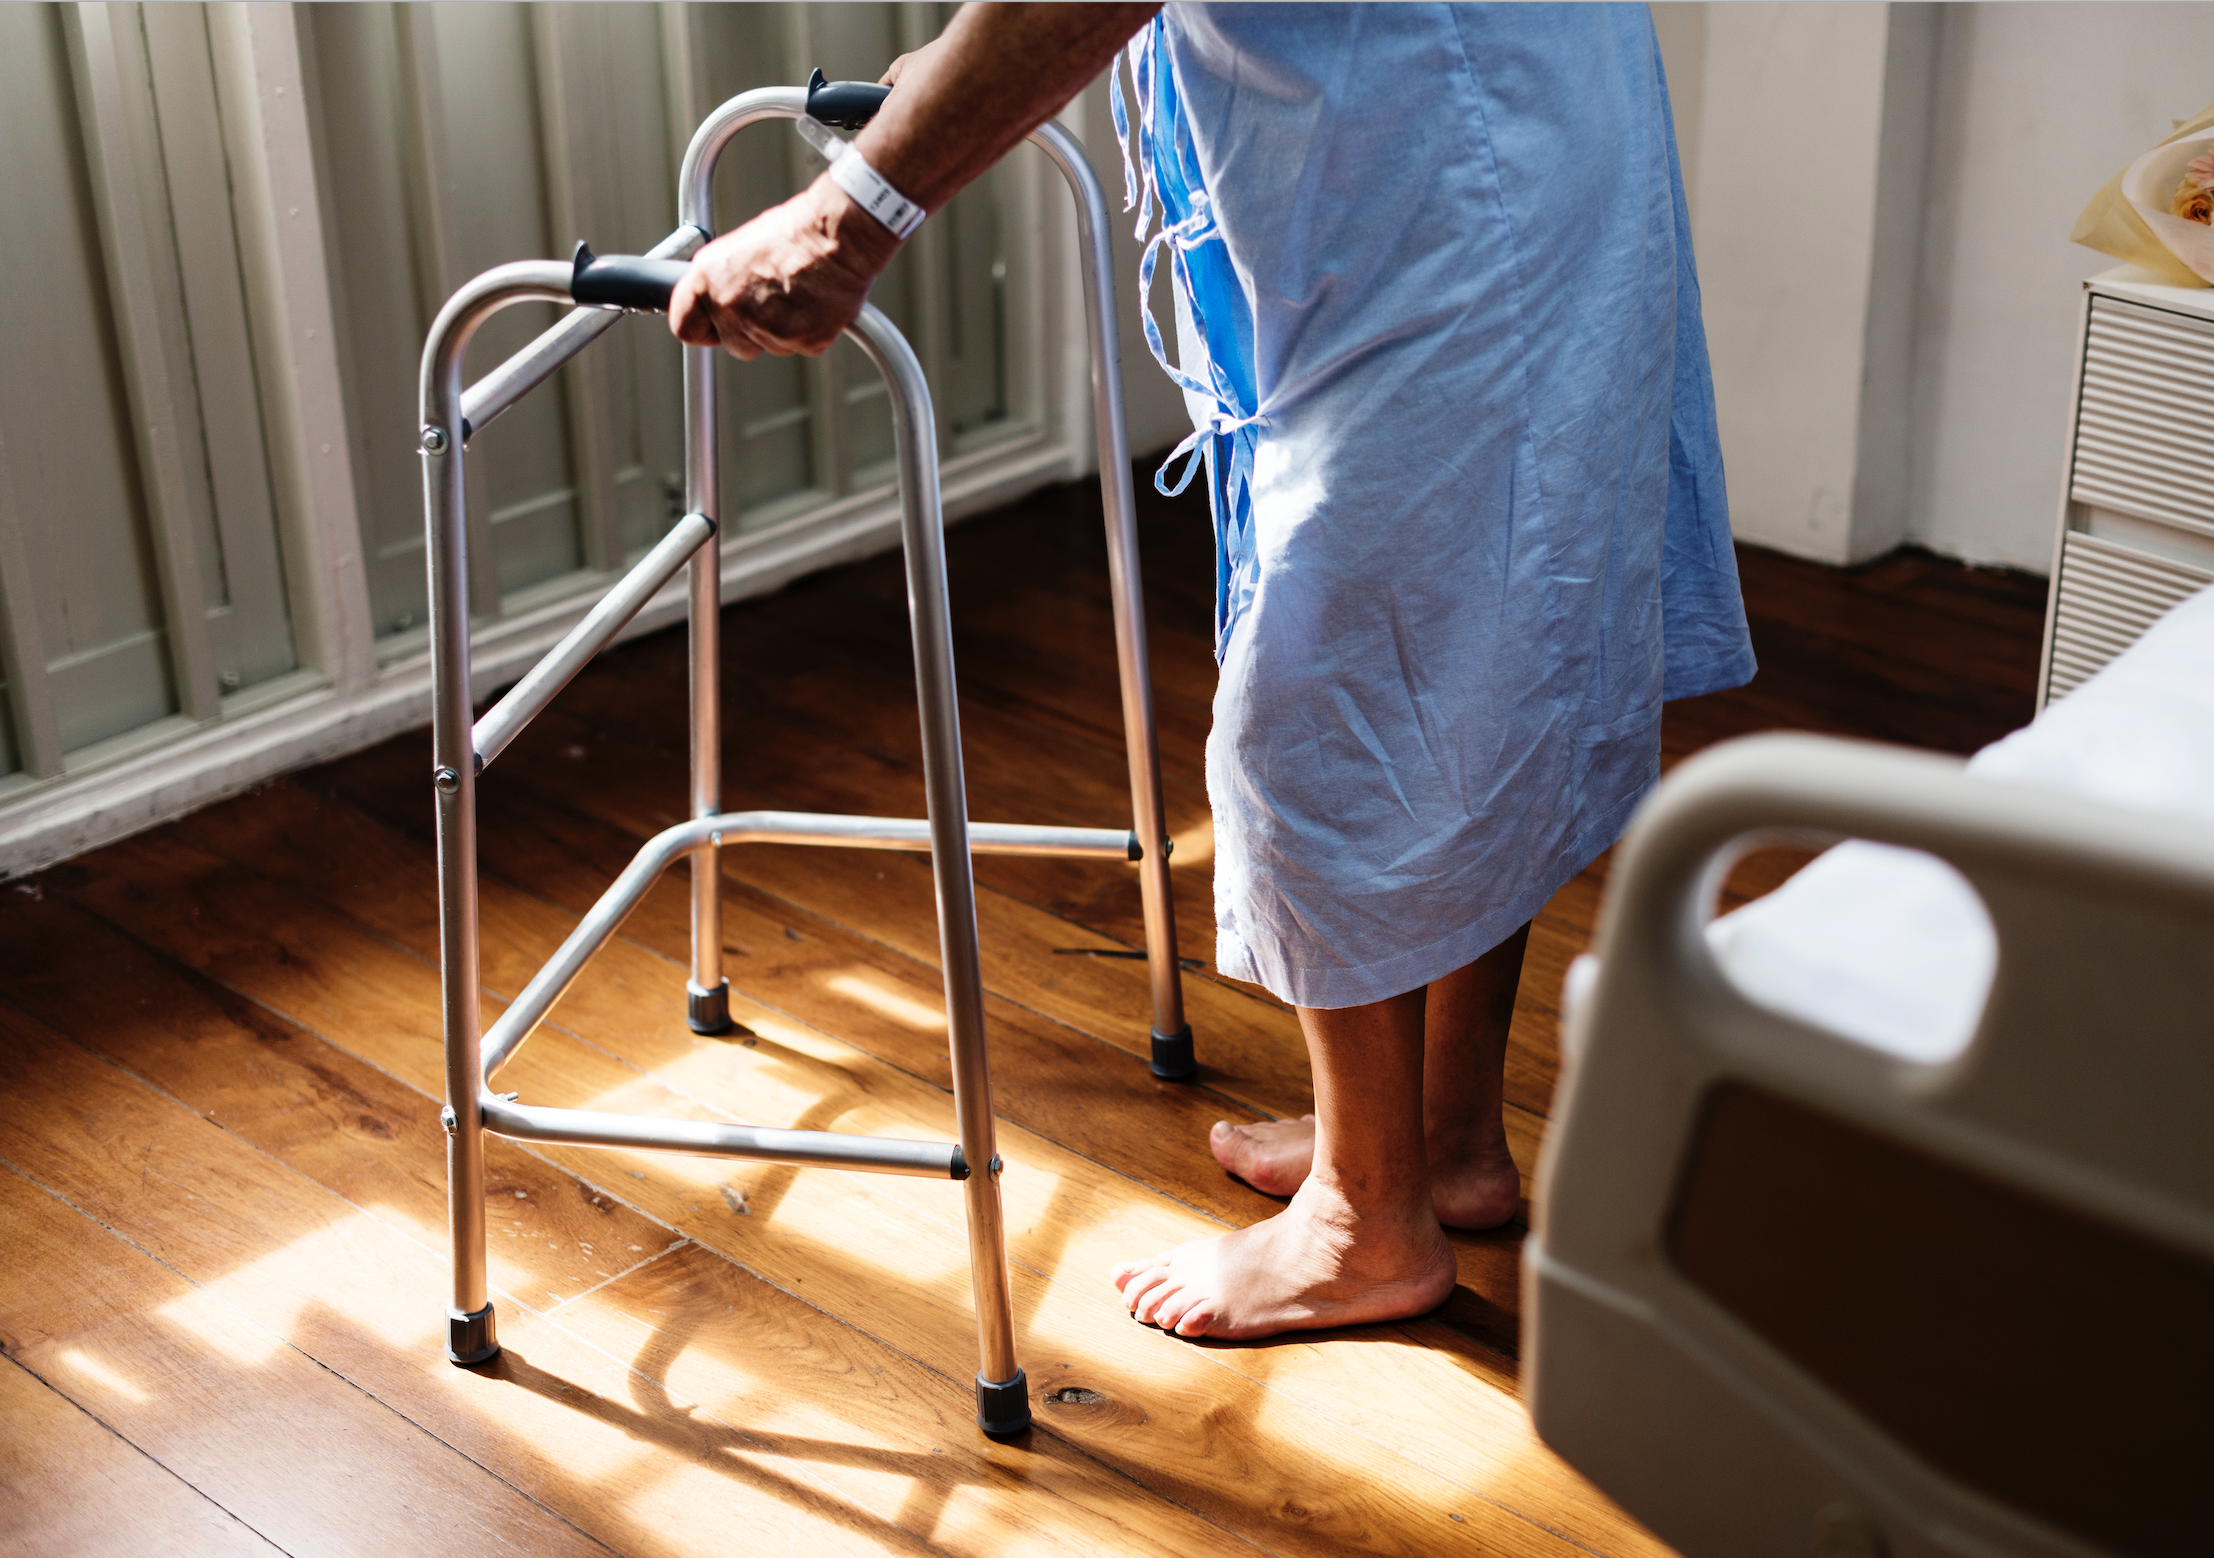 Man in a blue hospital gown is standing with the help of a walker to prevent new sore formation, which speeds up pressure ulcer treatment